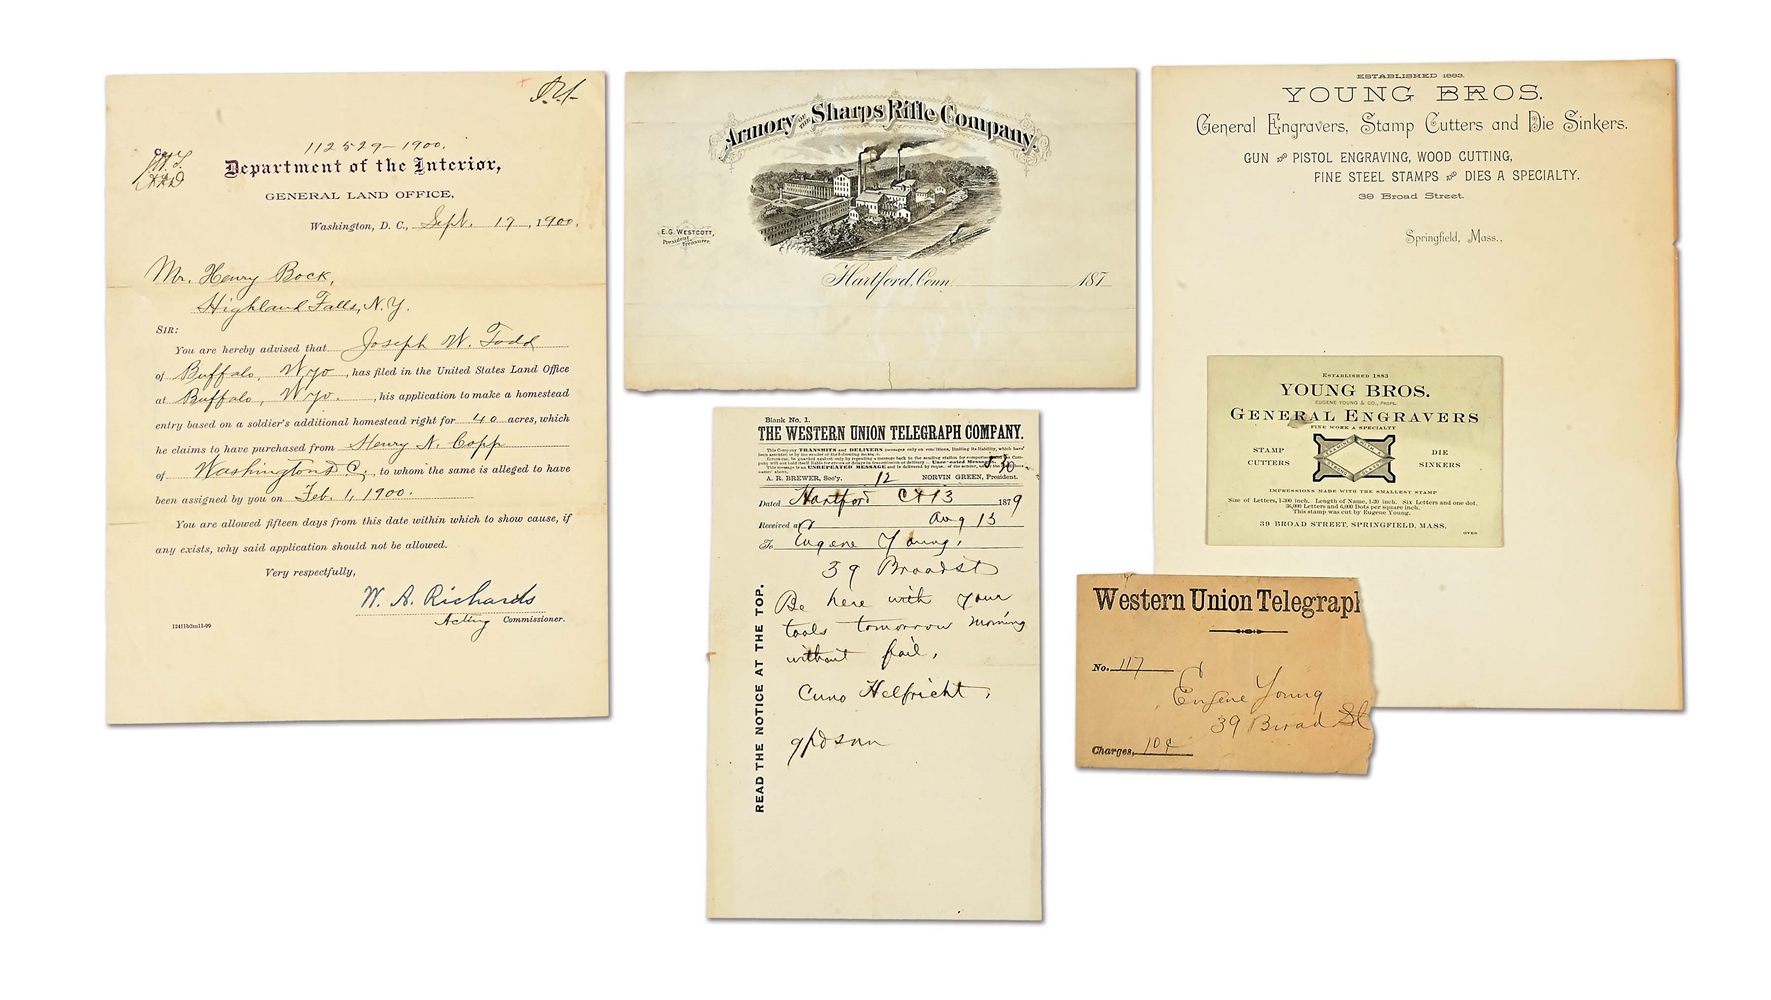 LOT OF DOCUMENTS PERTAINING TO YOUNG BROTHERS ENGRAVERS, ONE SIGNED BY CUNO HELFRICHT, AND A DEPARTMENT OF THE INTERIOR LAND DISPUTE DOCUMENT.